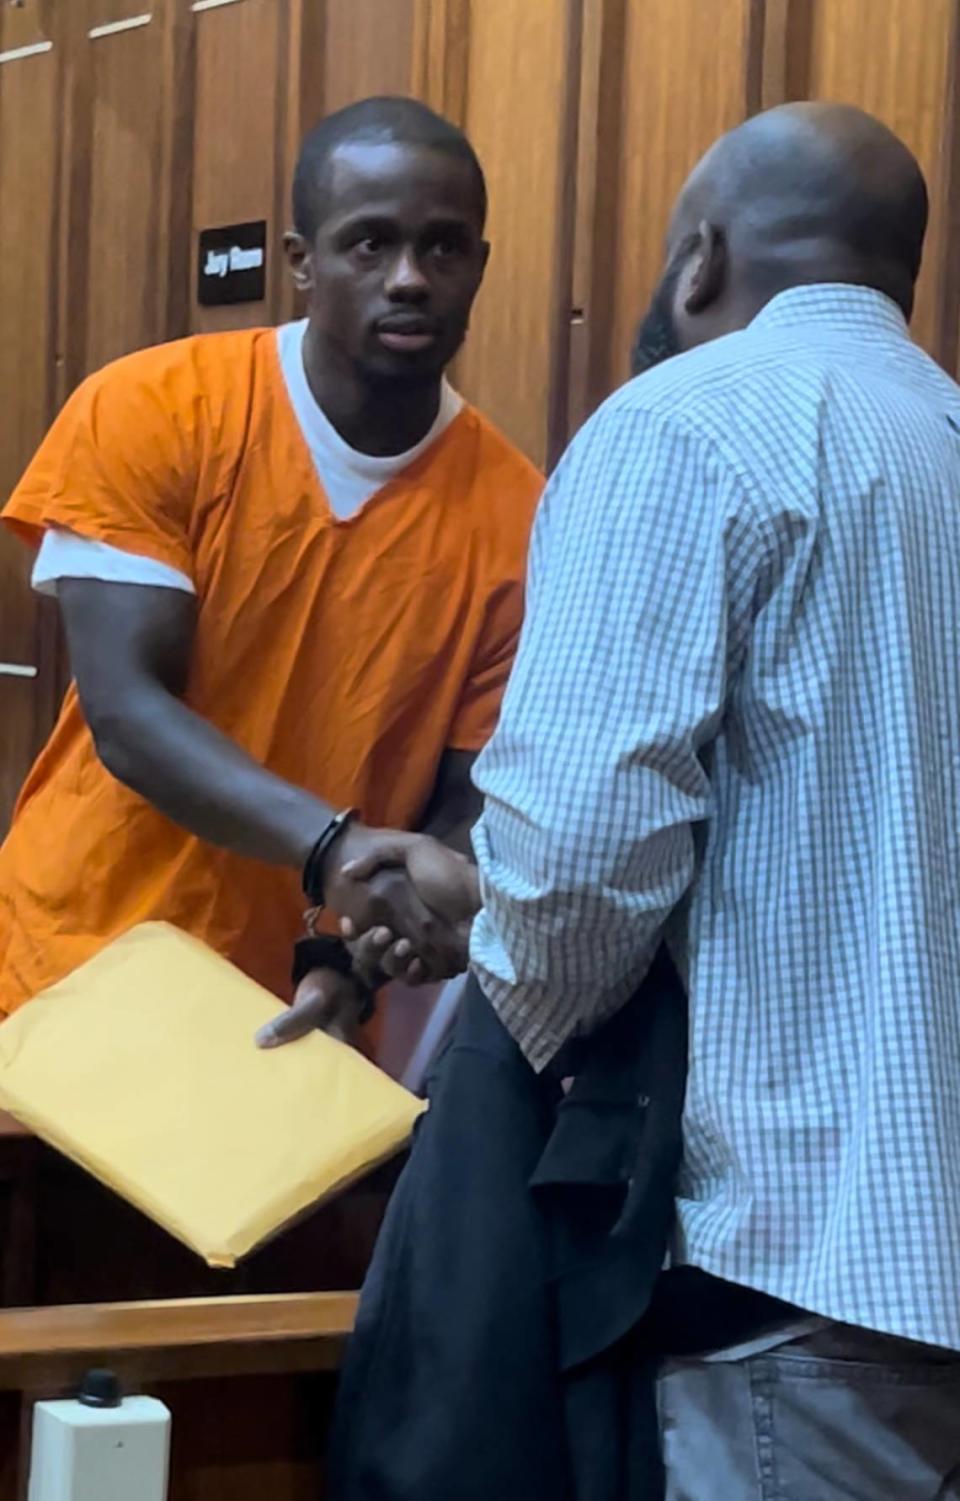 Emmanuel Jean, who was released from prison 16 years after being wrongfully accused, shakes the hand of a witness whose affidavit helped free him during an April hearing in front of Miami-Dade Circuit Court Judge Miguel De La O.